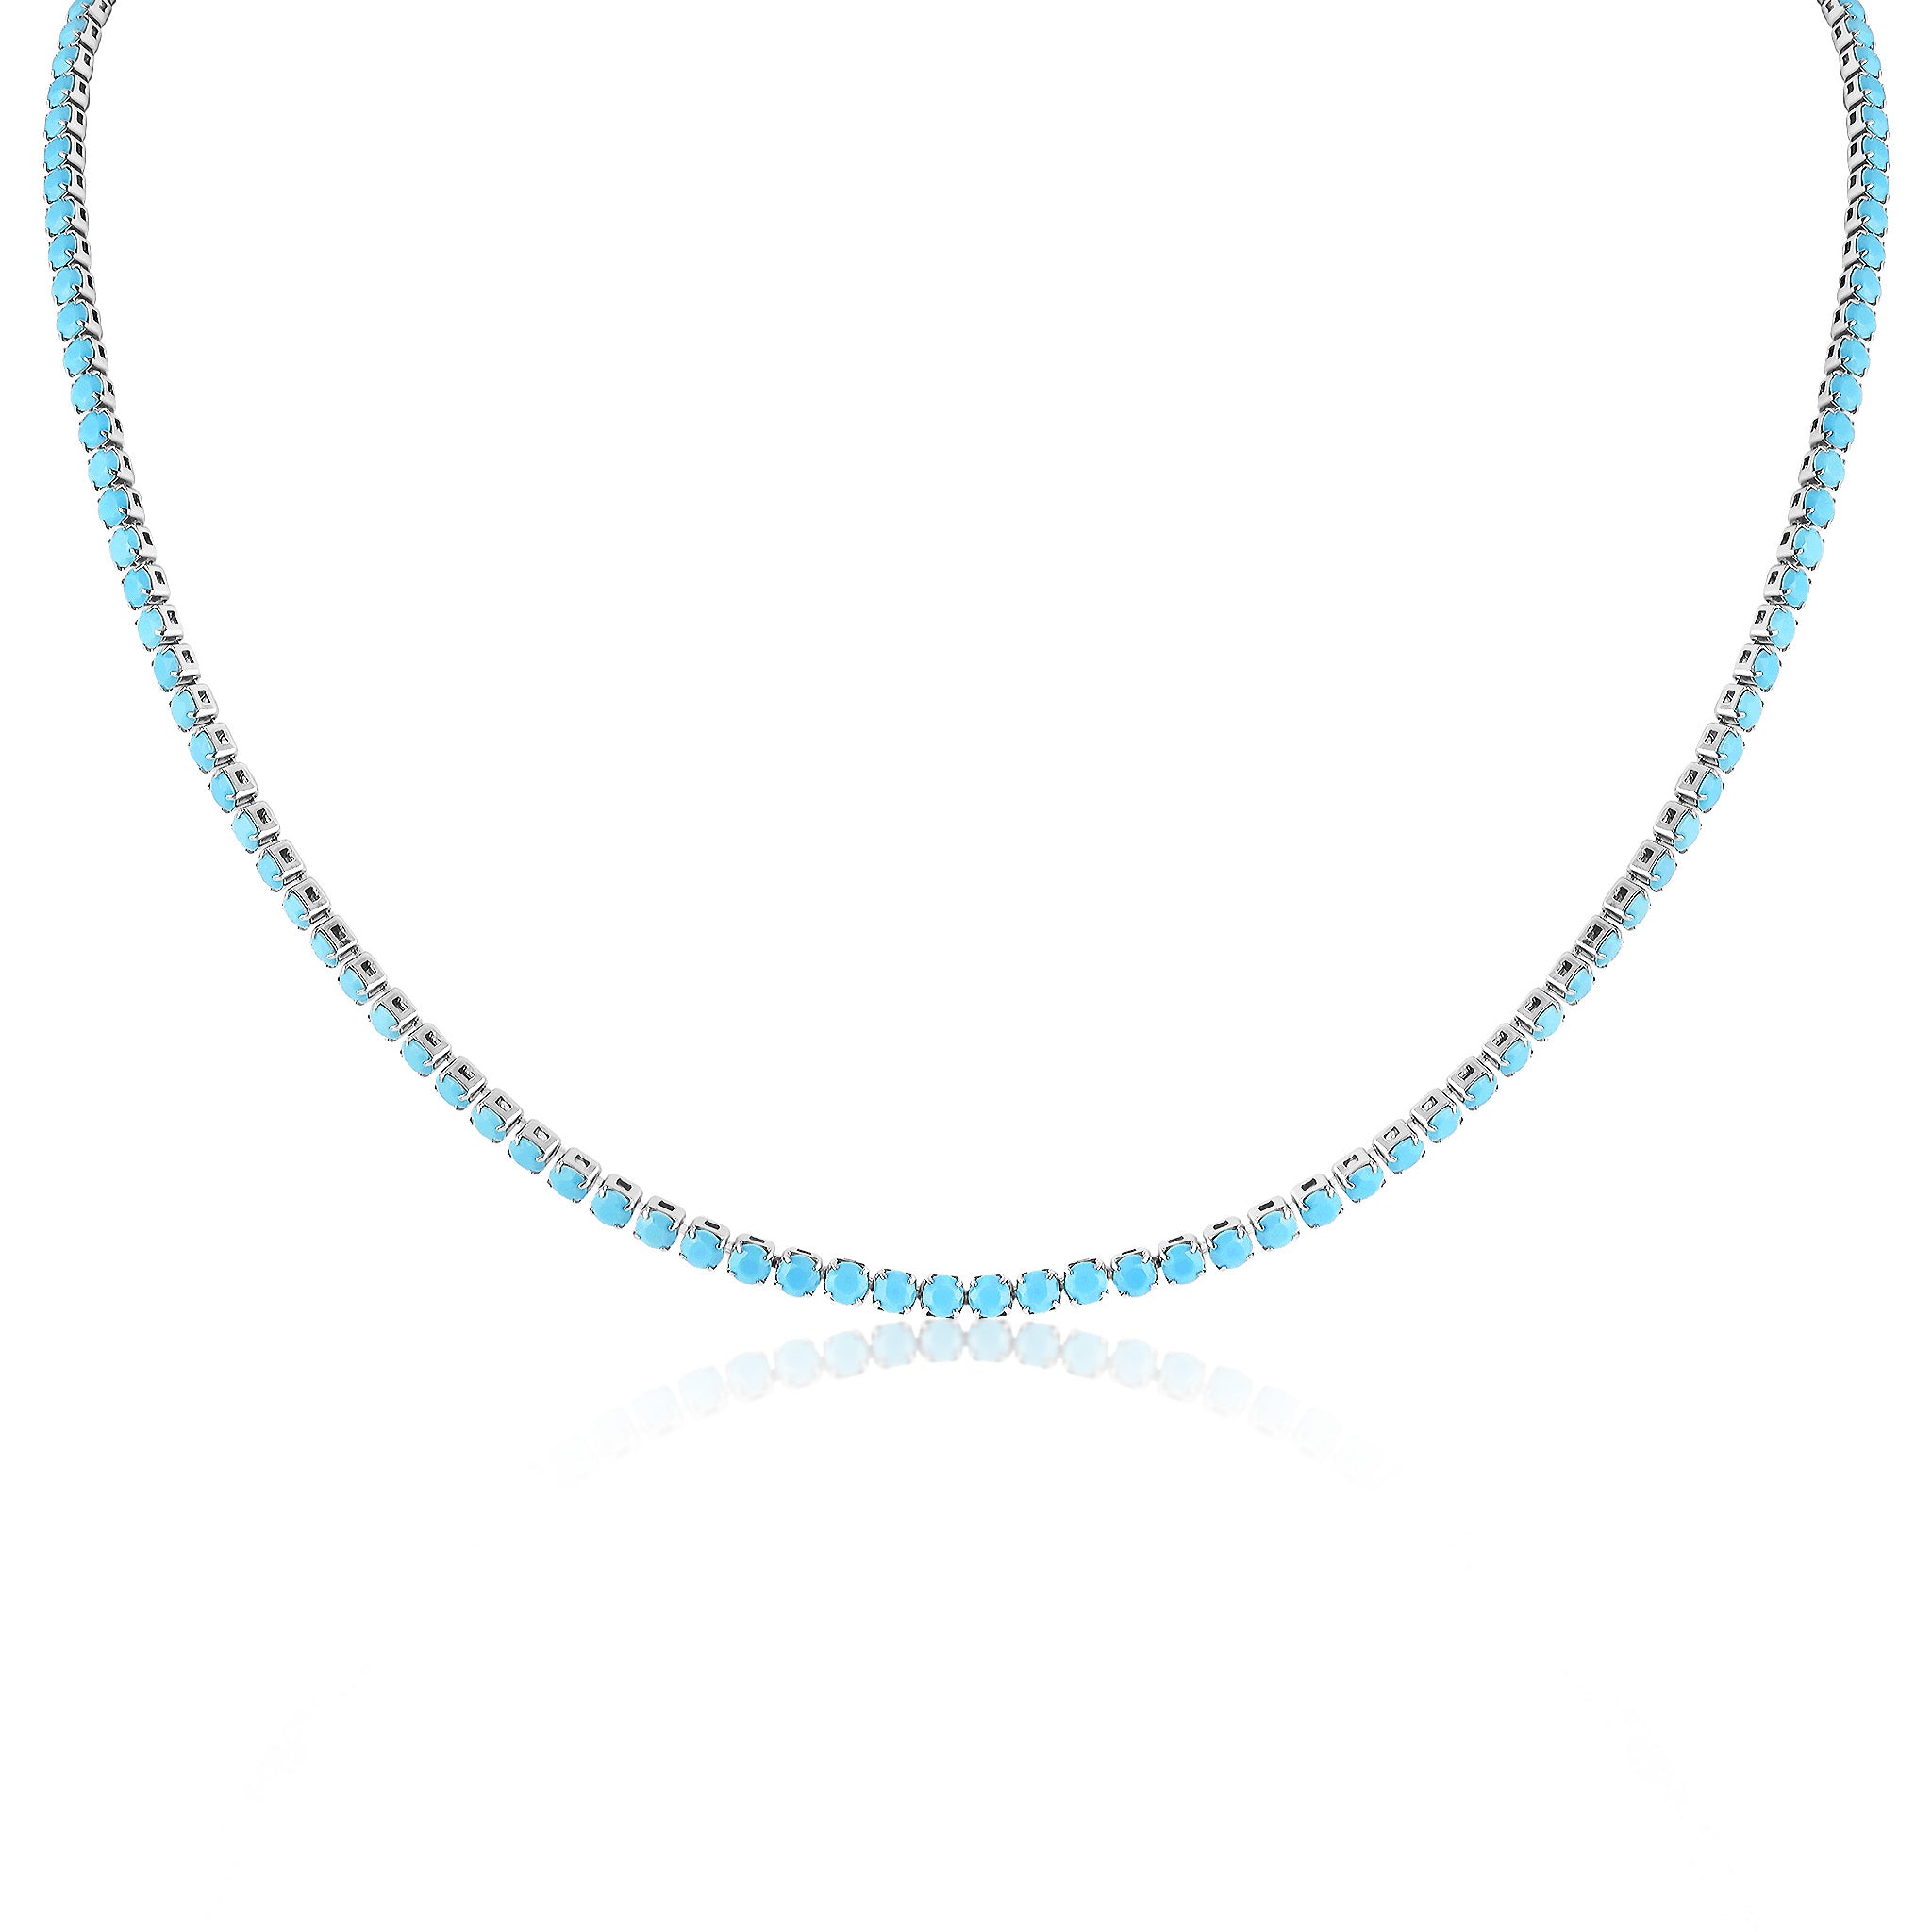 Stainless Steel Turquoise Rhinestone Tennis Chain Necklace With 2" Extension / TNN0005